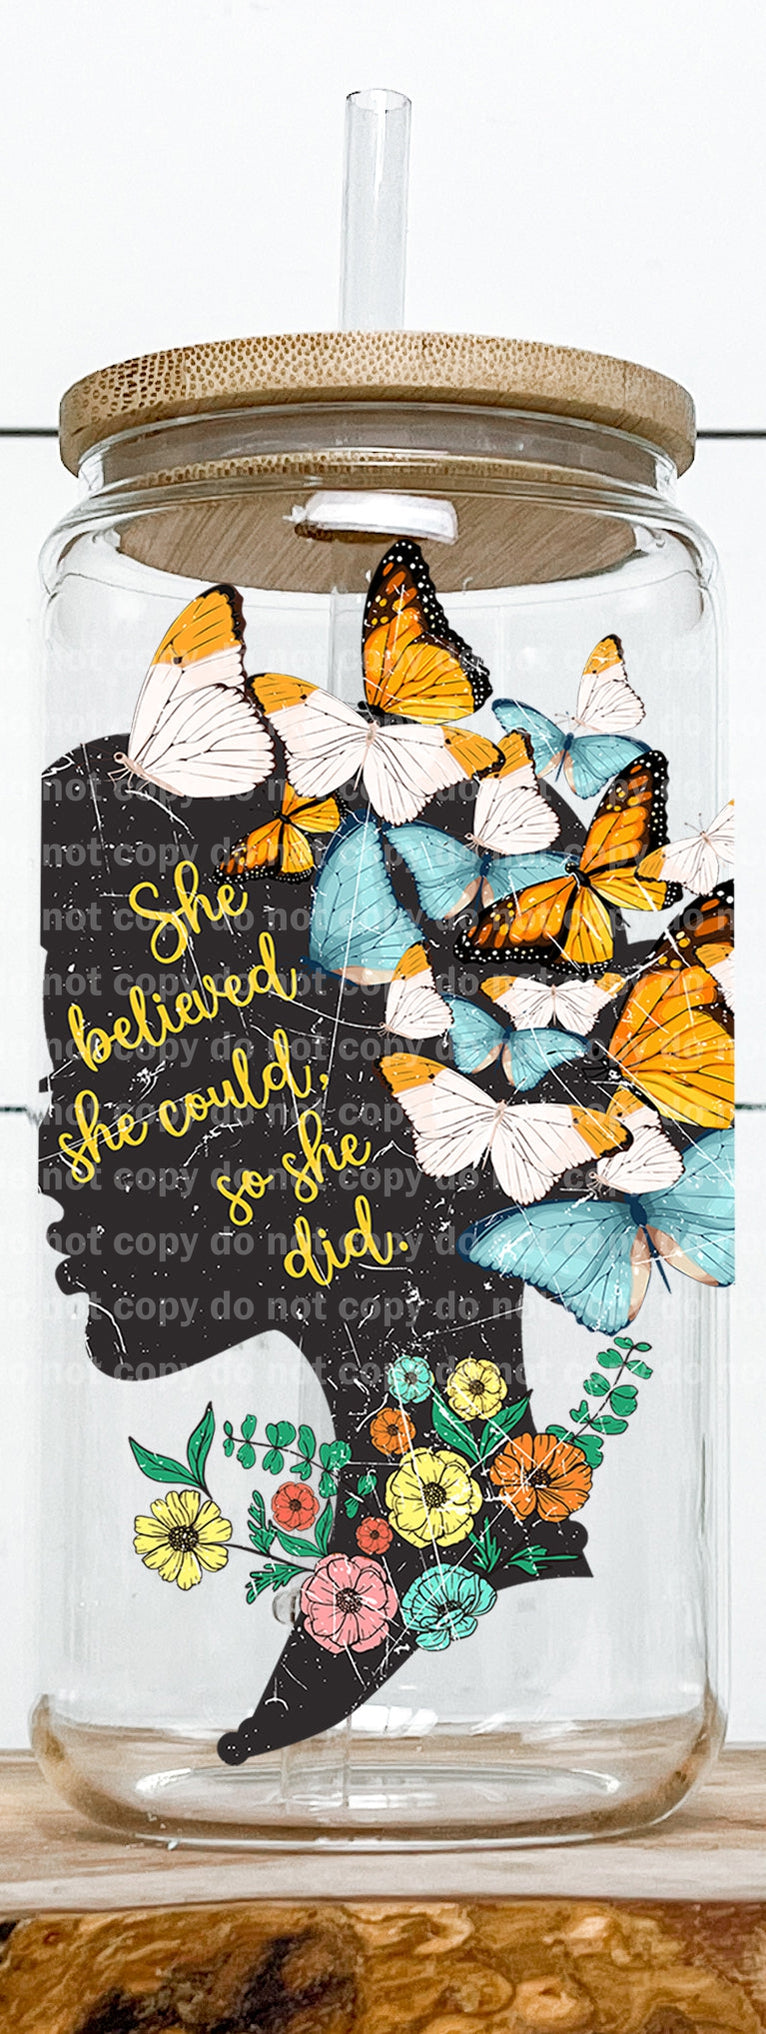 She Believed She Could So She Did Decal 3.5 x 5